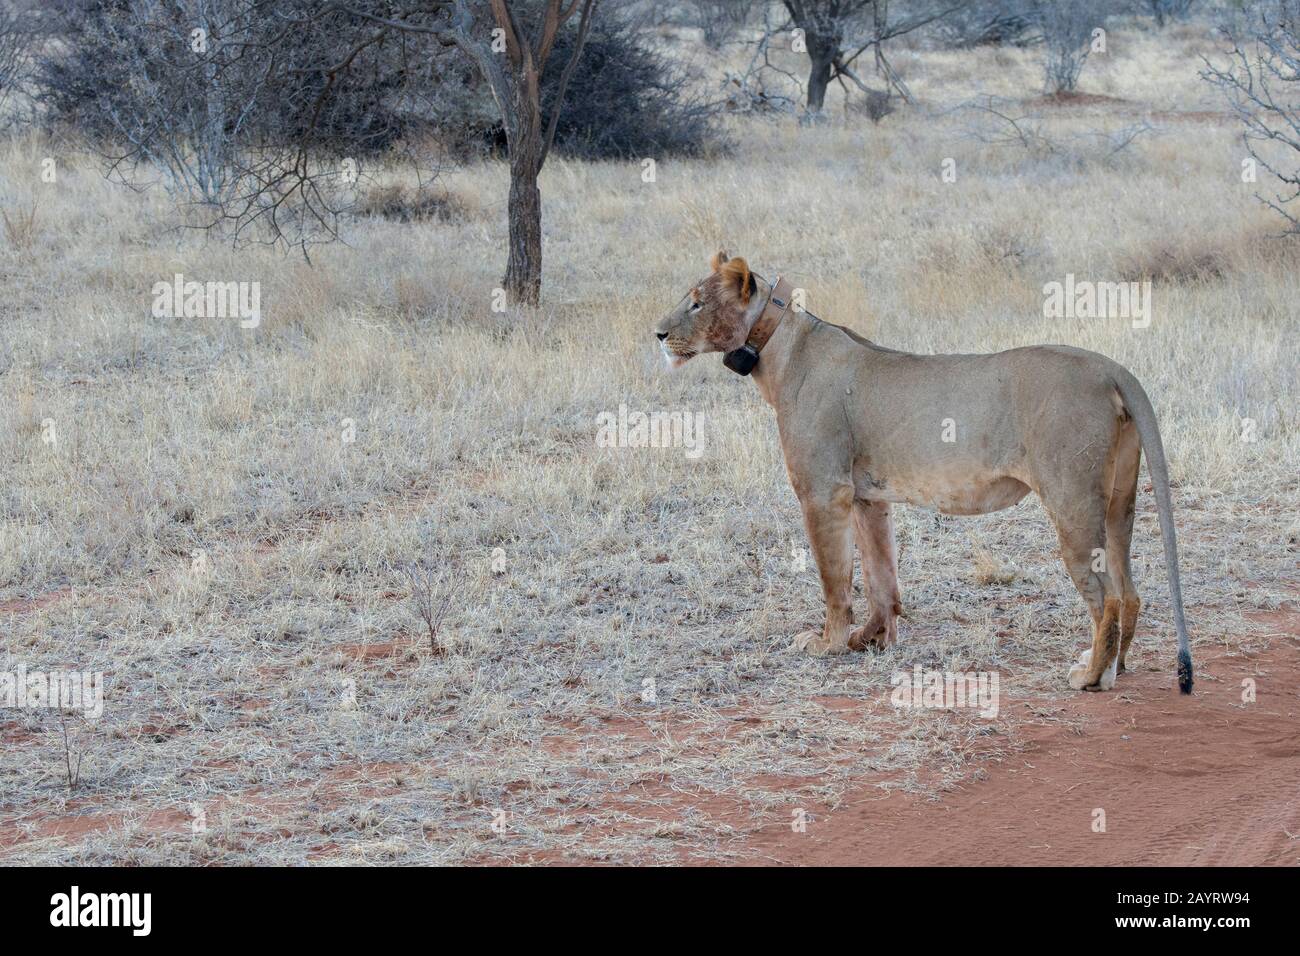 A lioness (Panthera leo) with a tracking collar in the Samburu National Reserve in Kenya. Stock Photo